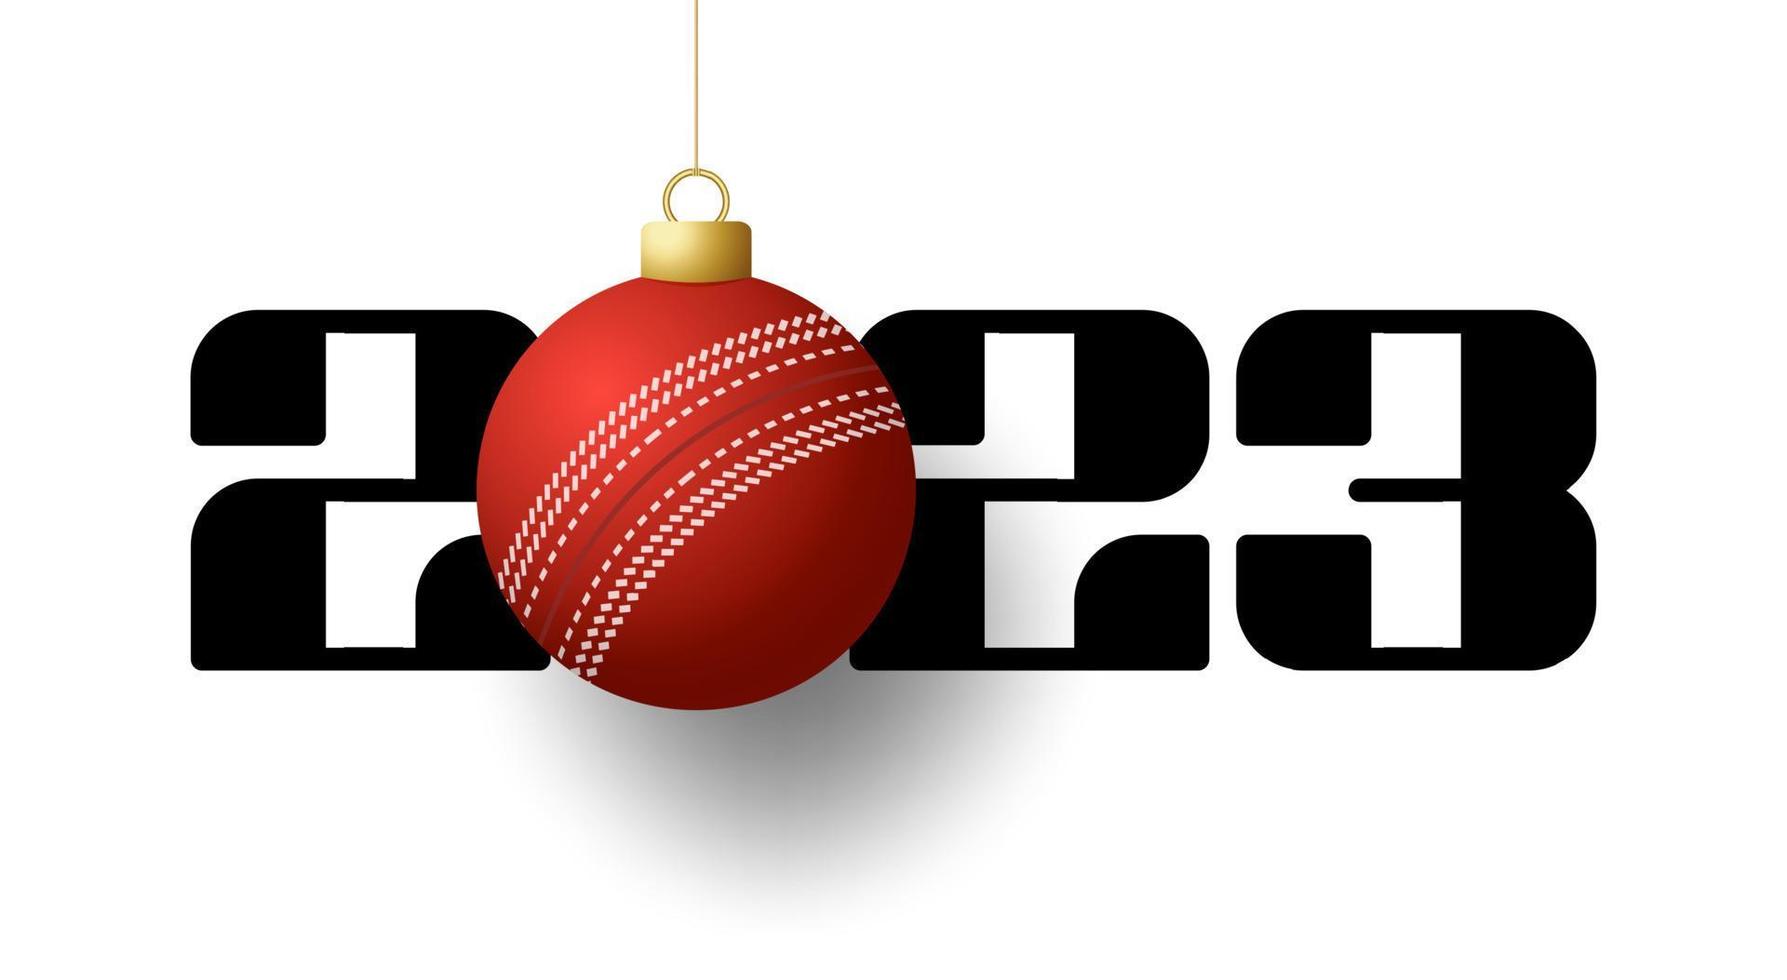 Cricket 2023 Happy New Year. Sports greeting card with golden cricket ball on the luxury background. Vector illustration.